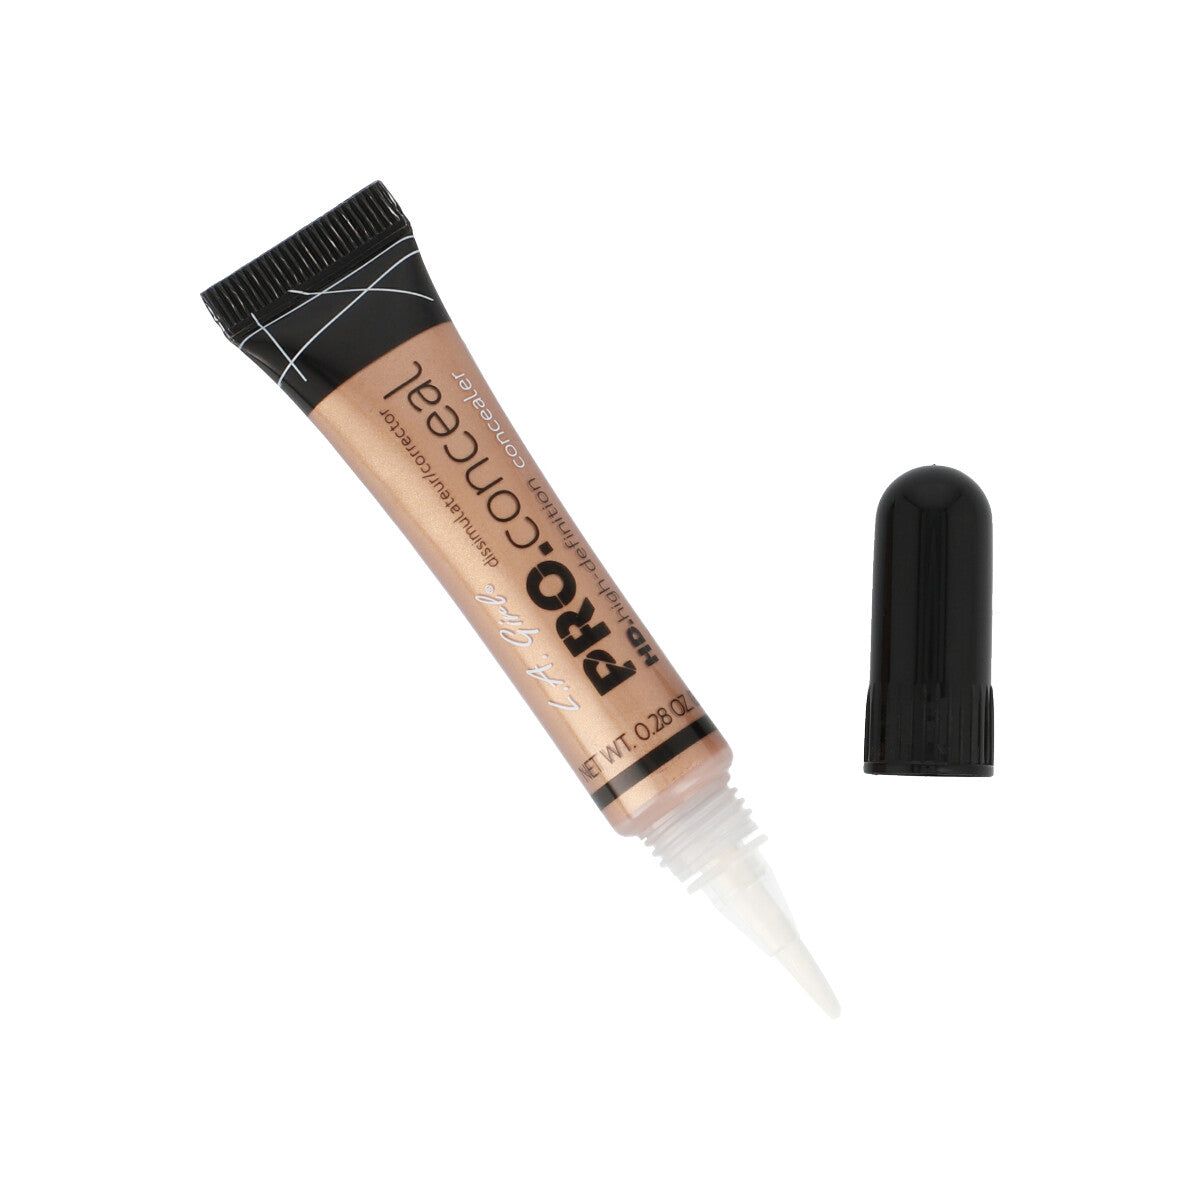 HD PRO. Conceal Champagne Highlighter